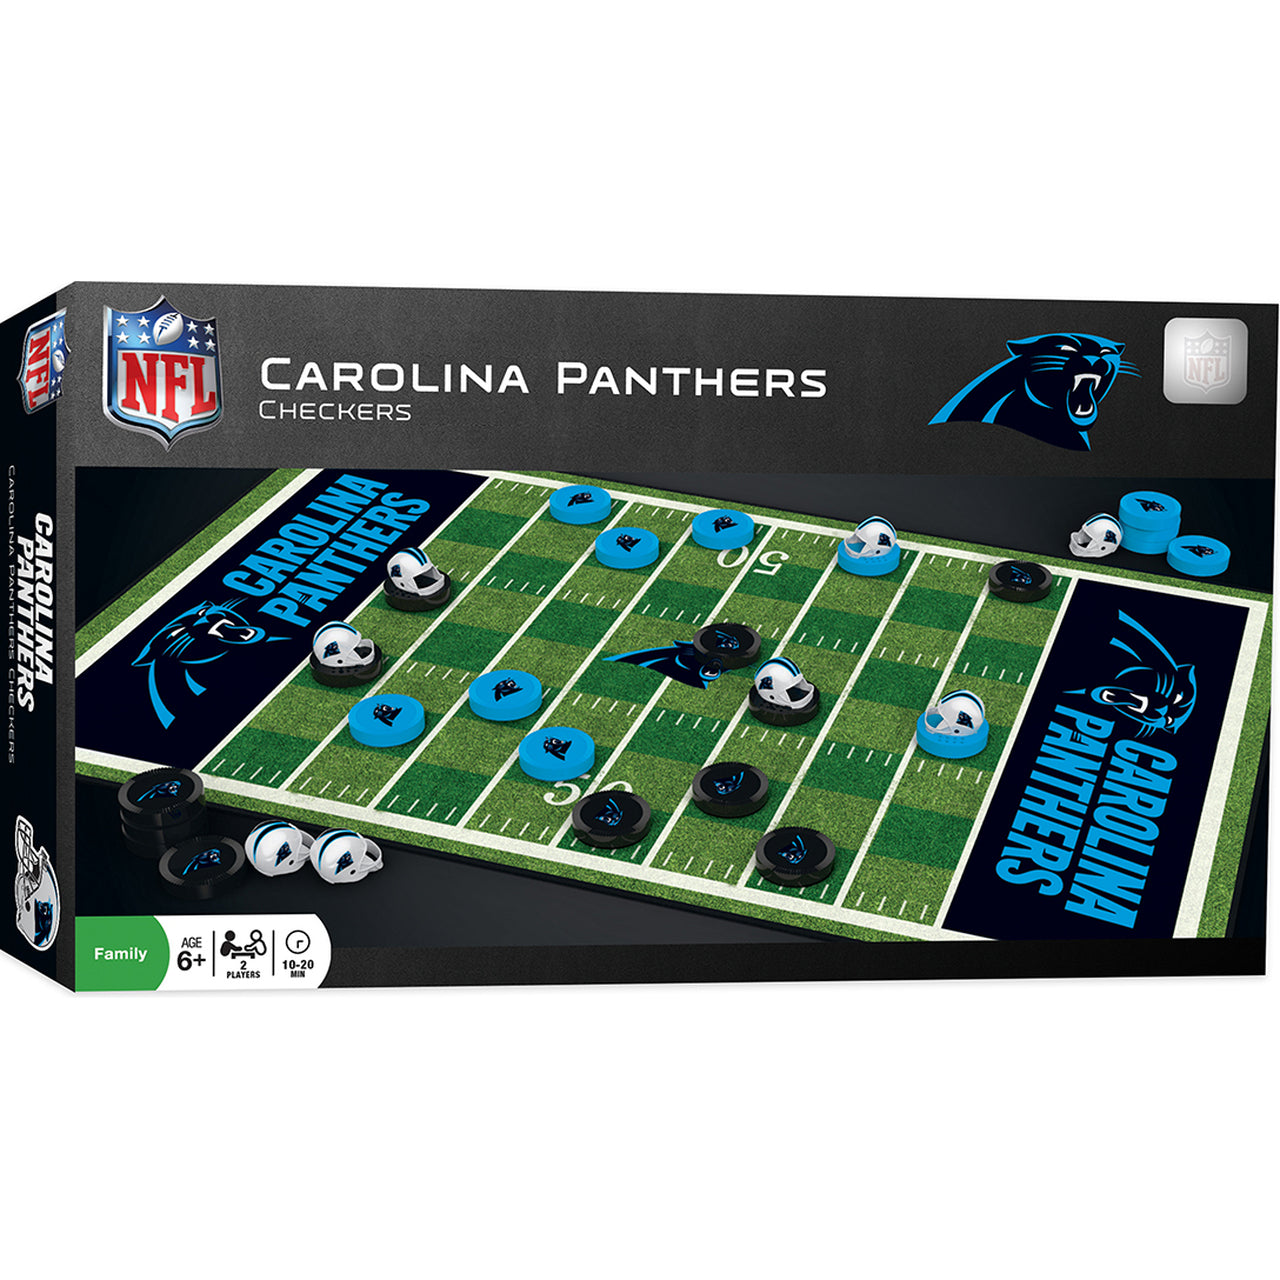 Carolina Panthers Checkers Board Game by Masterpieces